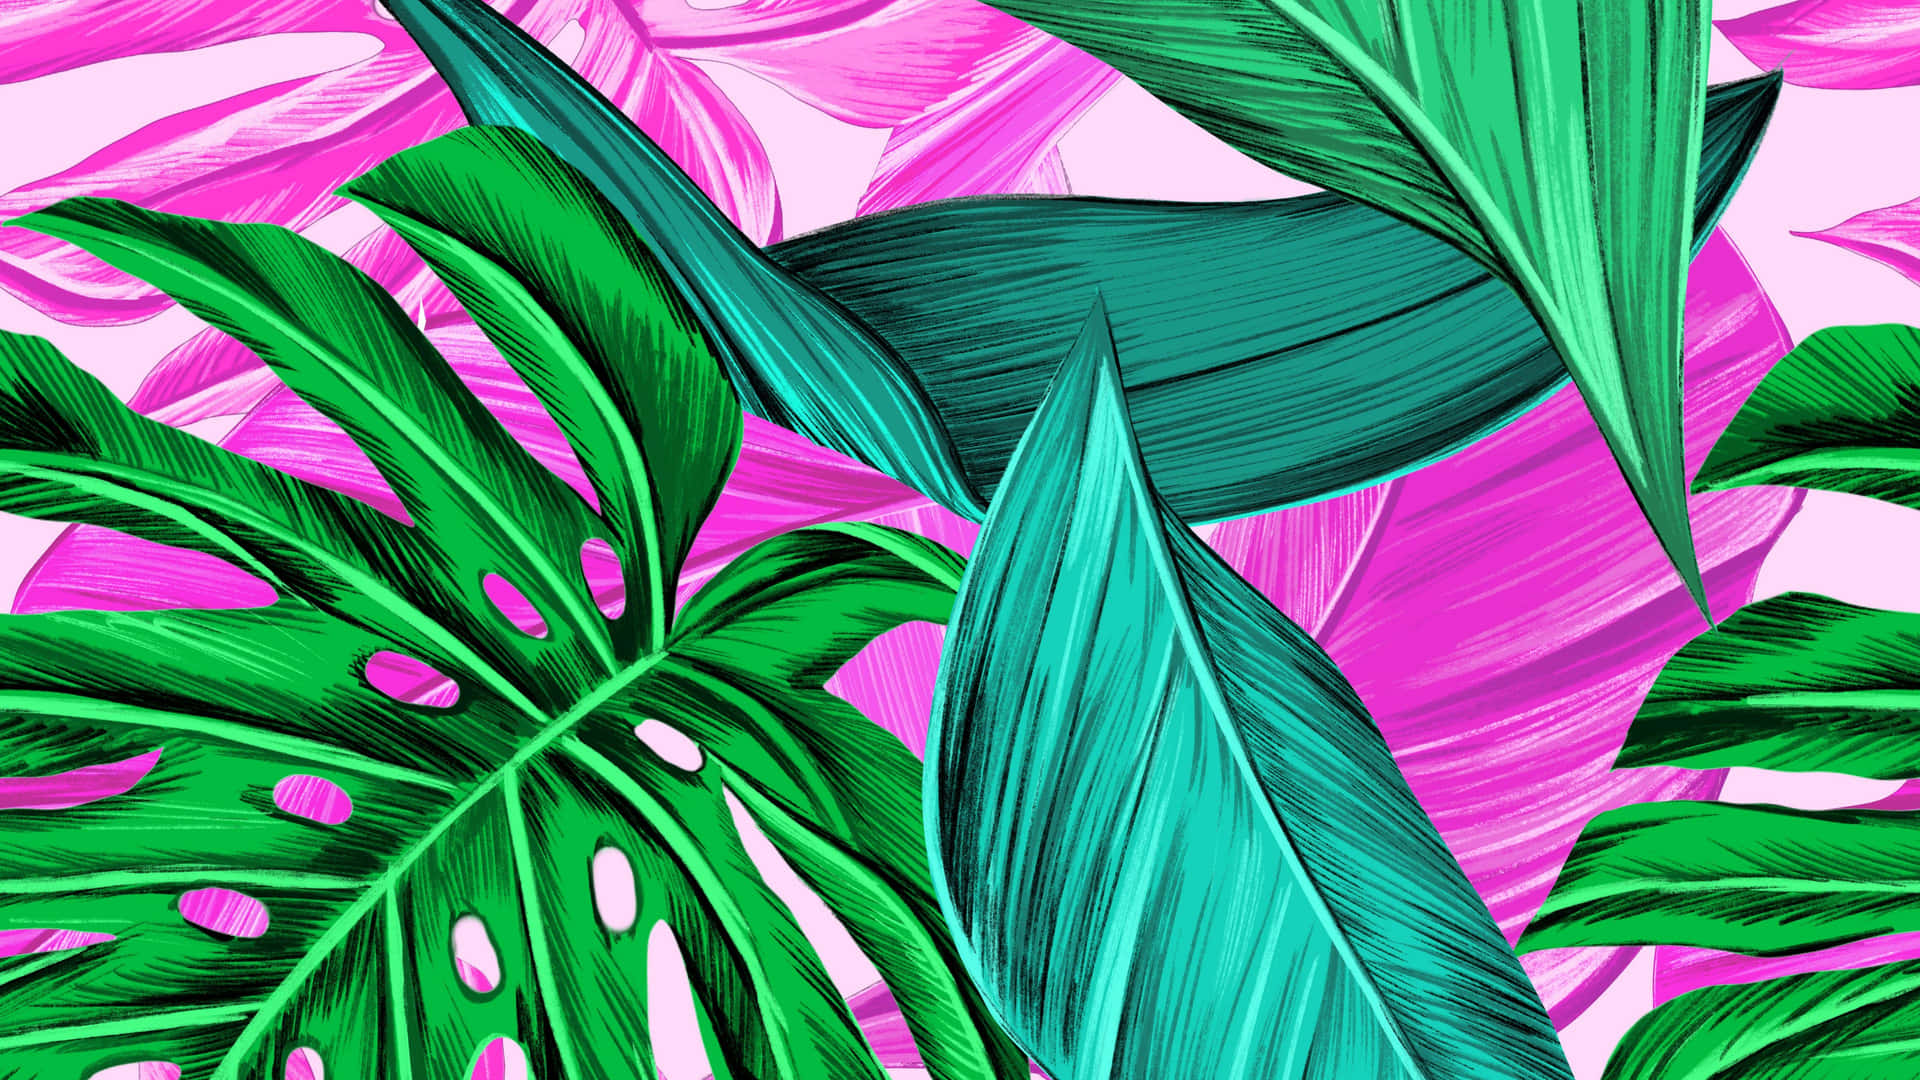 Vibrant Tropical Leaves Seem to Grace the Desktop of an Eager and Inspired Vacationer Wallpaper